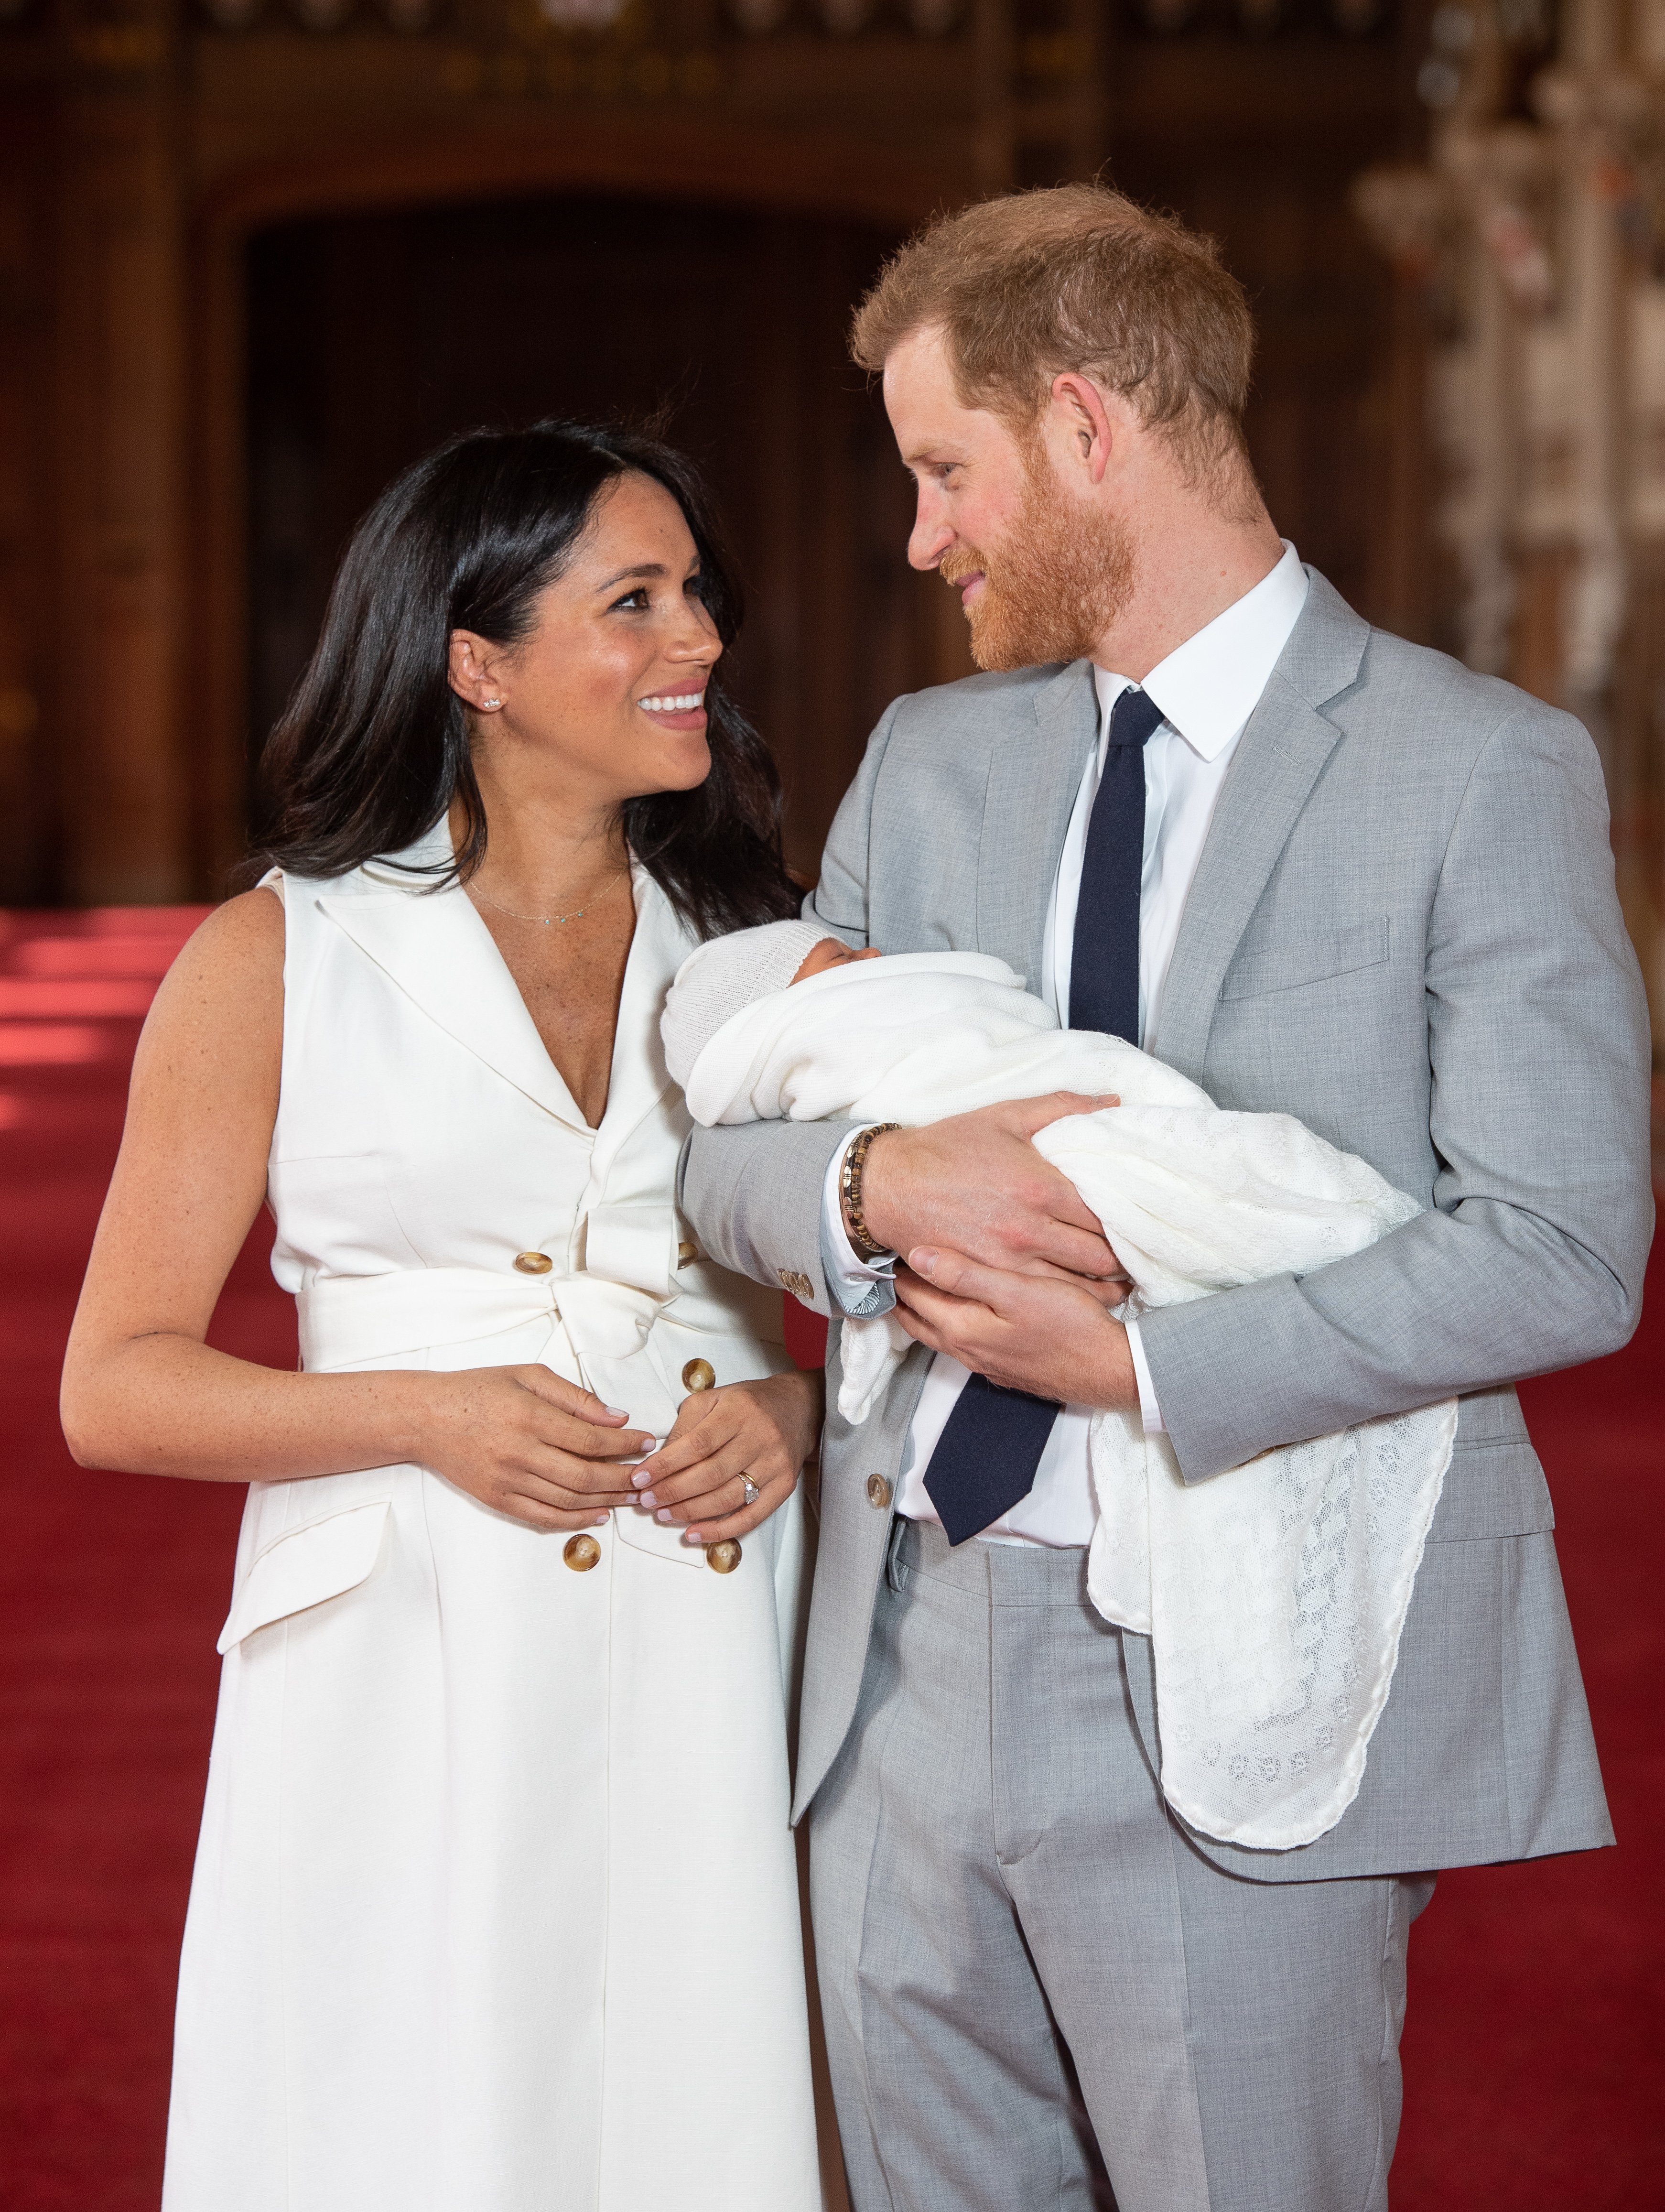 Prince Harry, Duke of Sussex and Meghan, Duchess of Sussex pose with their newborn son Archie Harrison Mountbatten-Windsor during a photo call at St George's Hall at Windsor Castle on May 8, 2019 in Windsor, England.  Source: Getty Images 